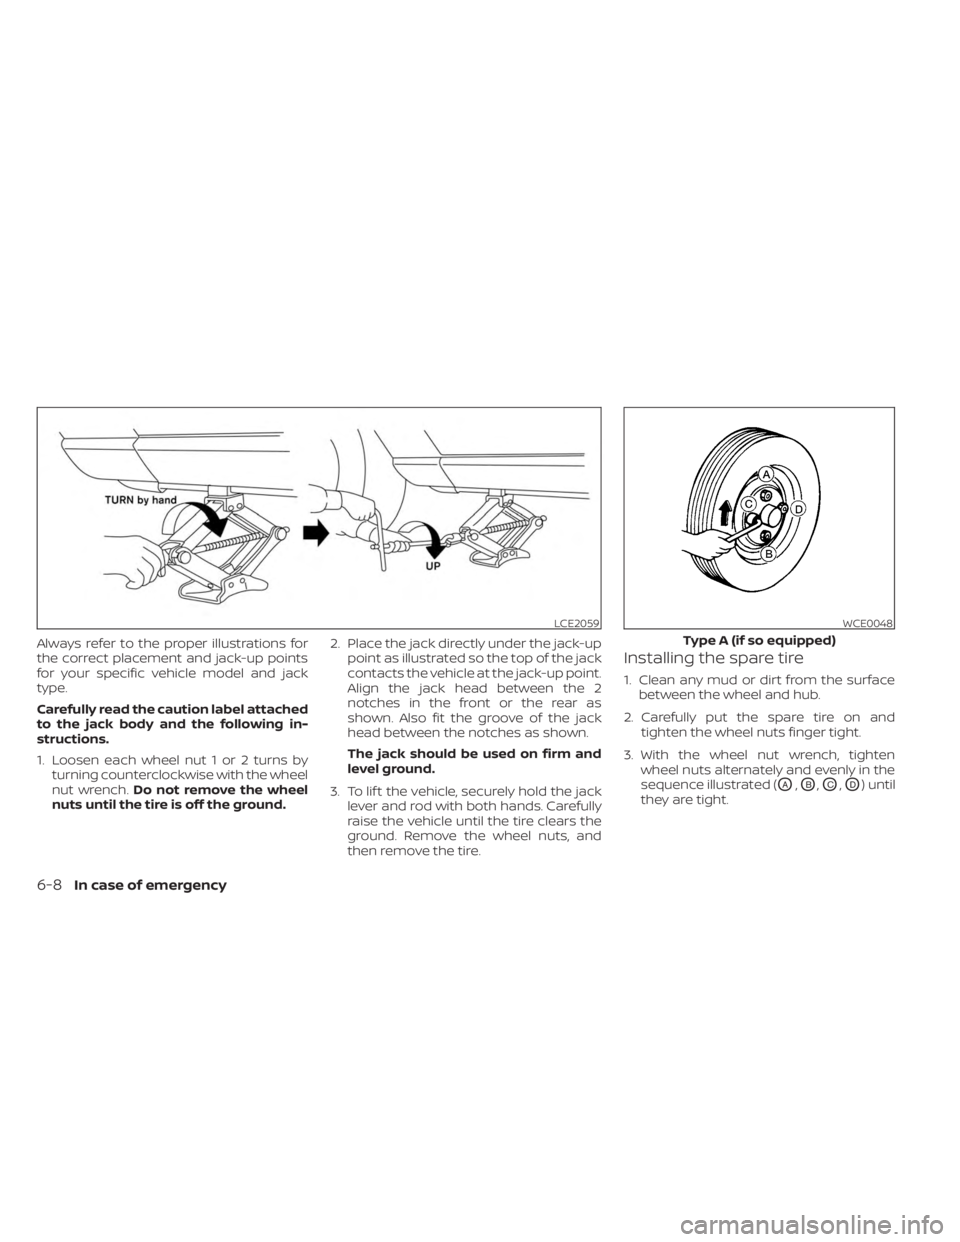 NISSAN KICKS 2023  Owners Manual Always refer to the proper illustrations for
the correct placement and jack-up points
for your specific vehicle model and jack
type.
Carefully read the caution label attached
to the jack body and the 